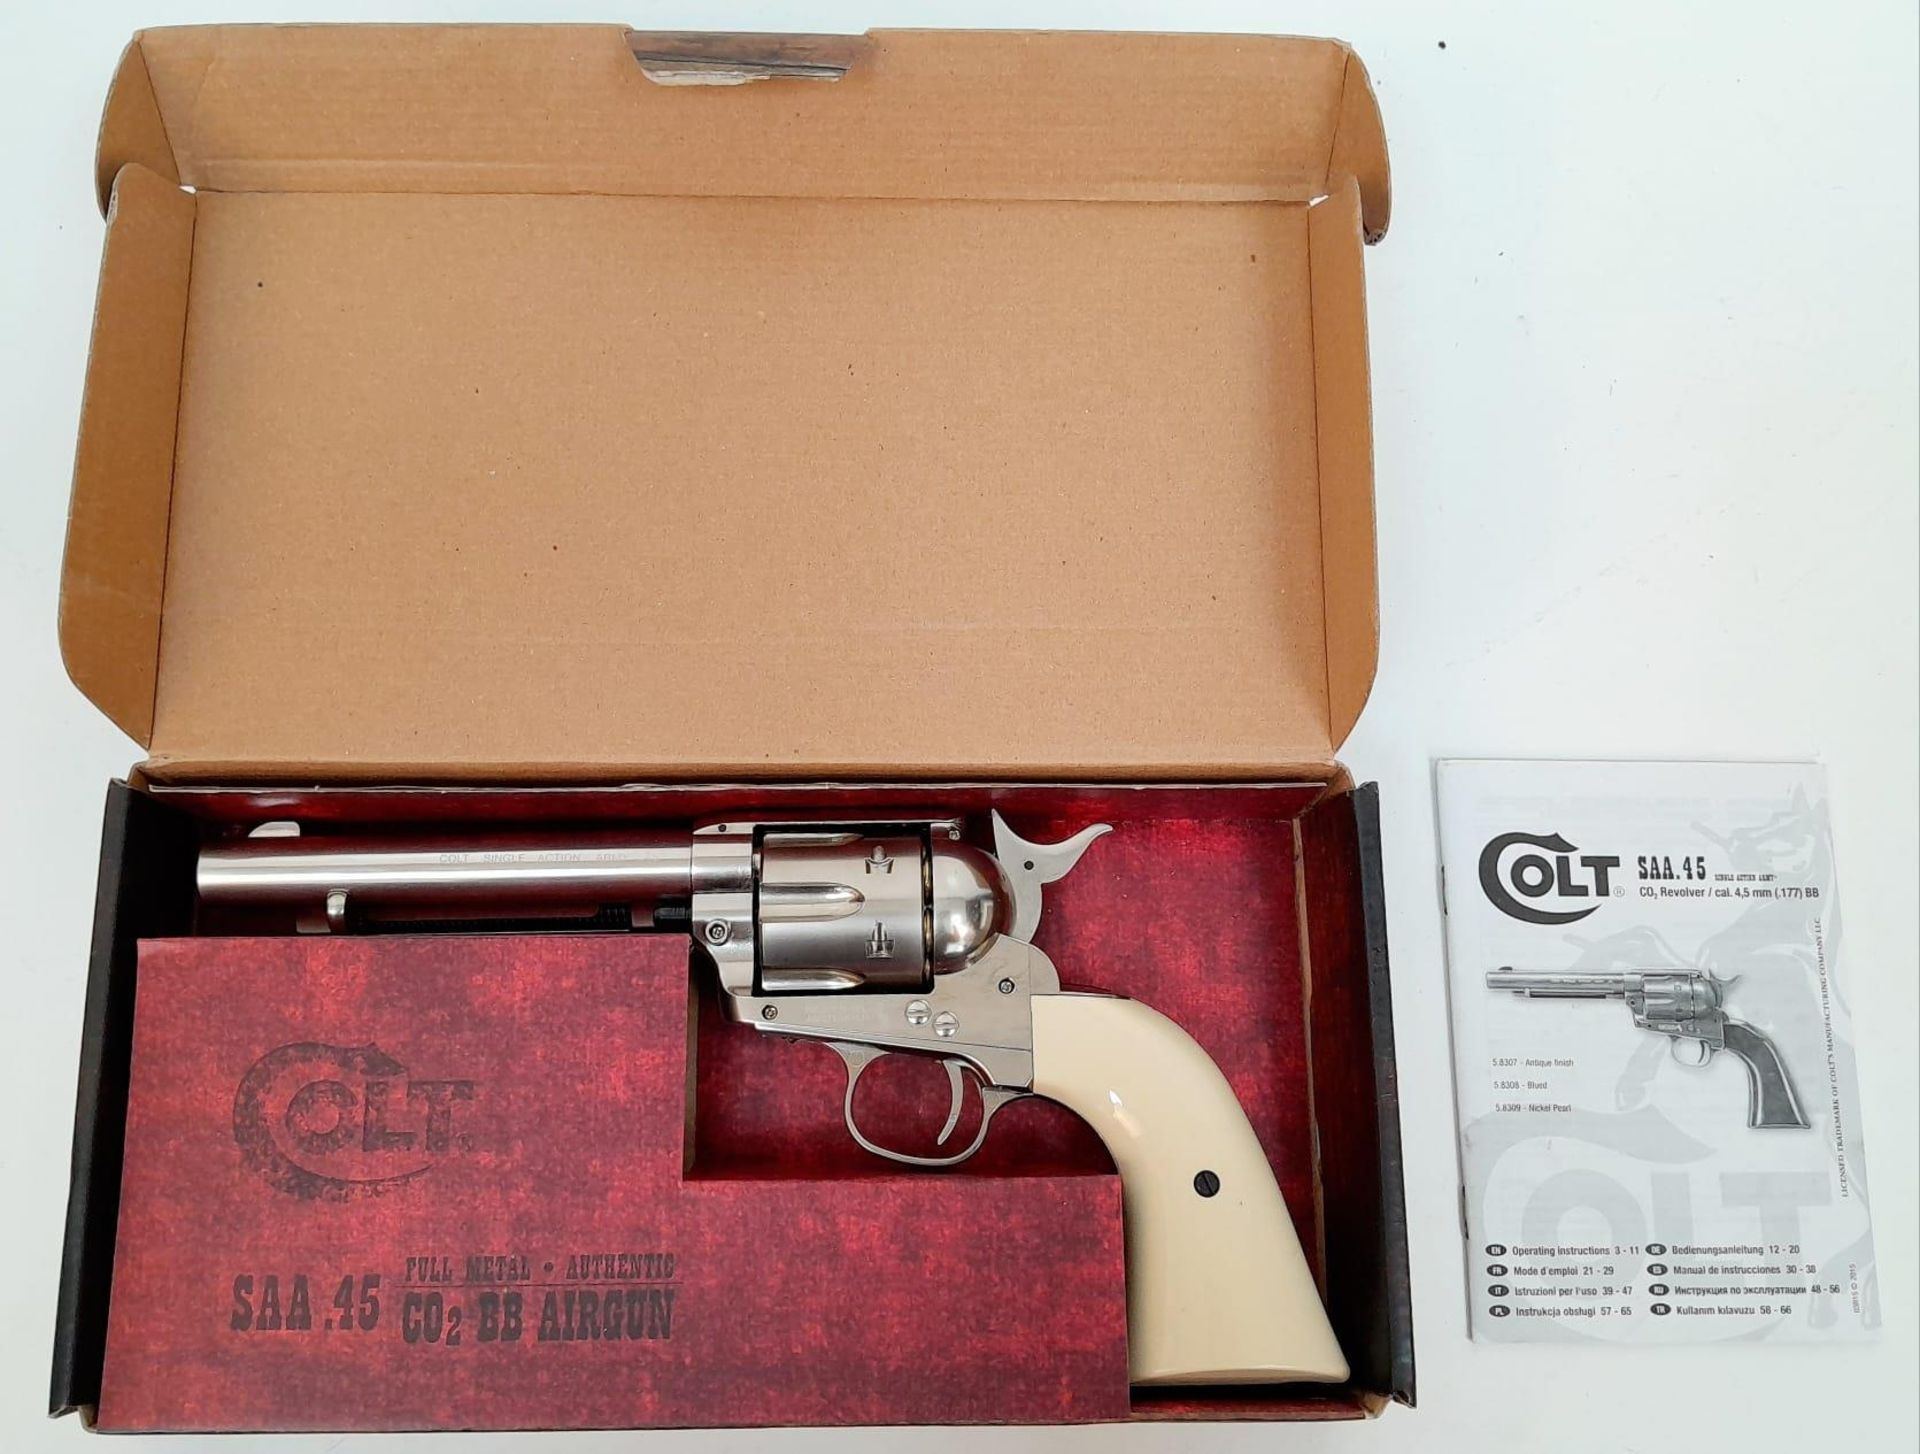 A Colt SAA.45 CO2 .177 Revolver. Complete with Box and Manual. Shoots .177 Metal BB’s. UK MAINLAND - Image 2 of 12